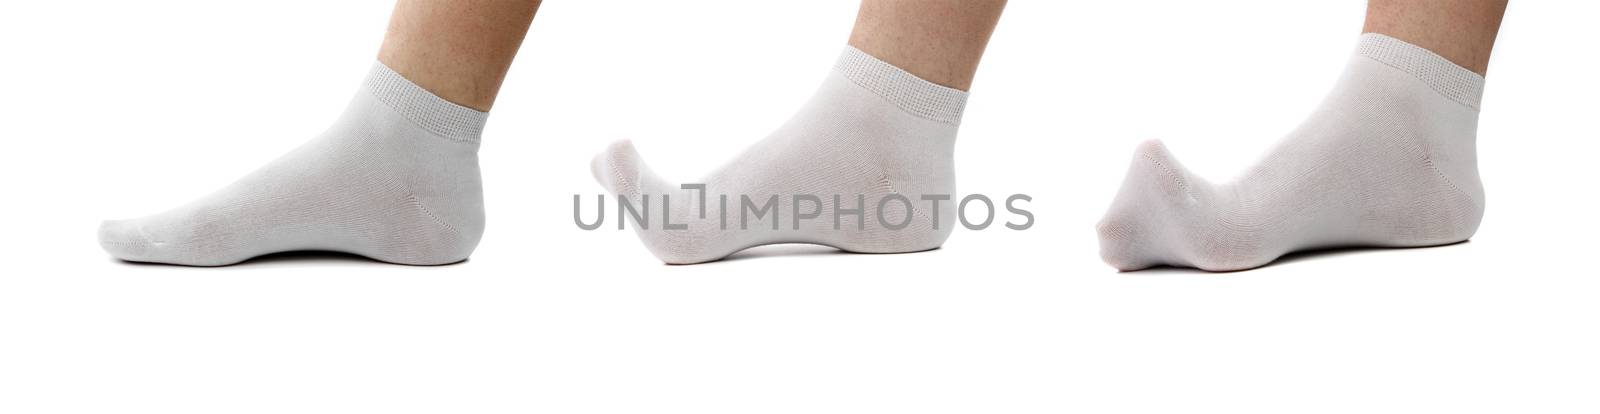 Collage socks on foot. Isolated on a white background.